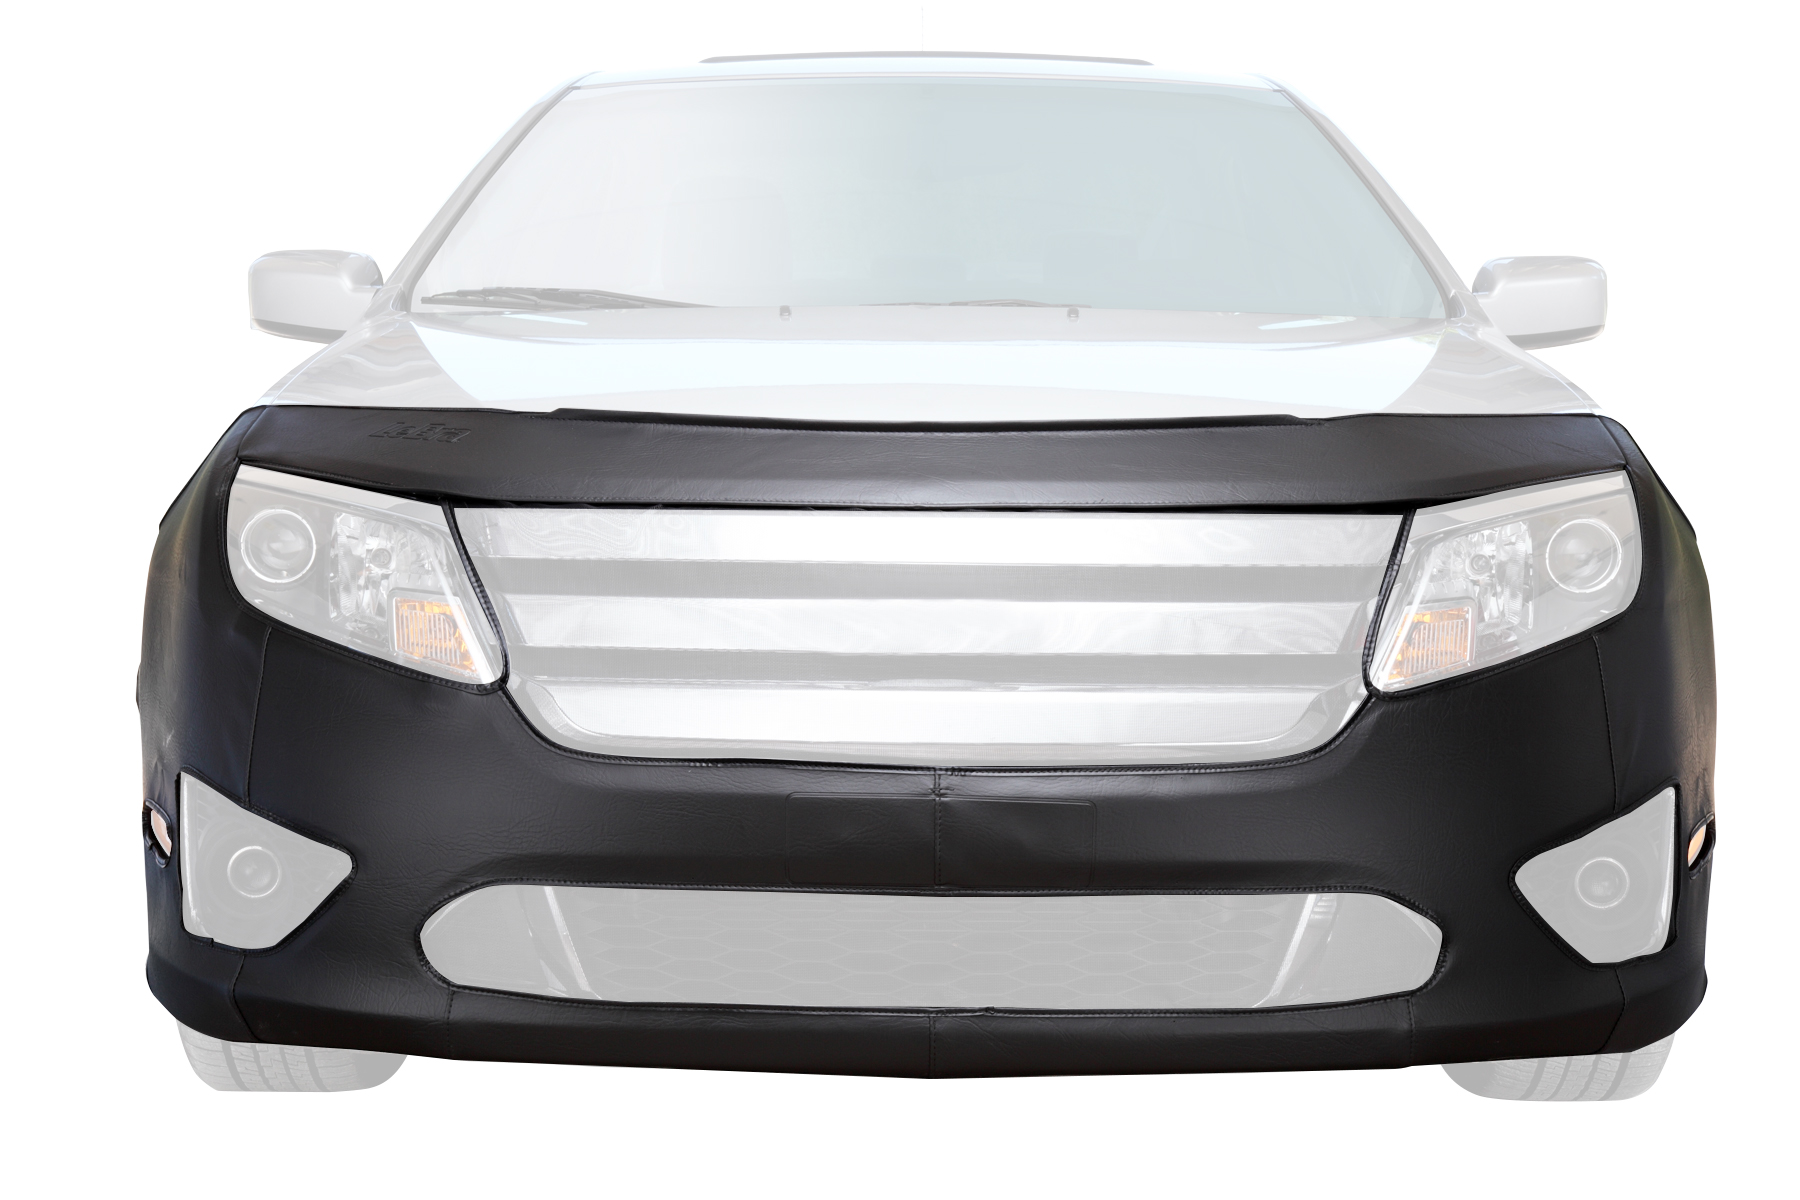 Covercraft LeBra Custom Front End Cover for 2009-2012 Ford Escape | 551188-01 | Black - image 1 of 10